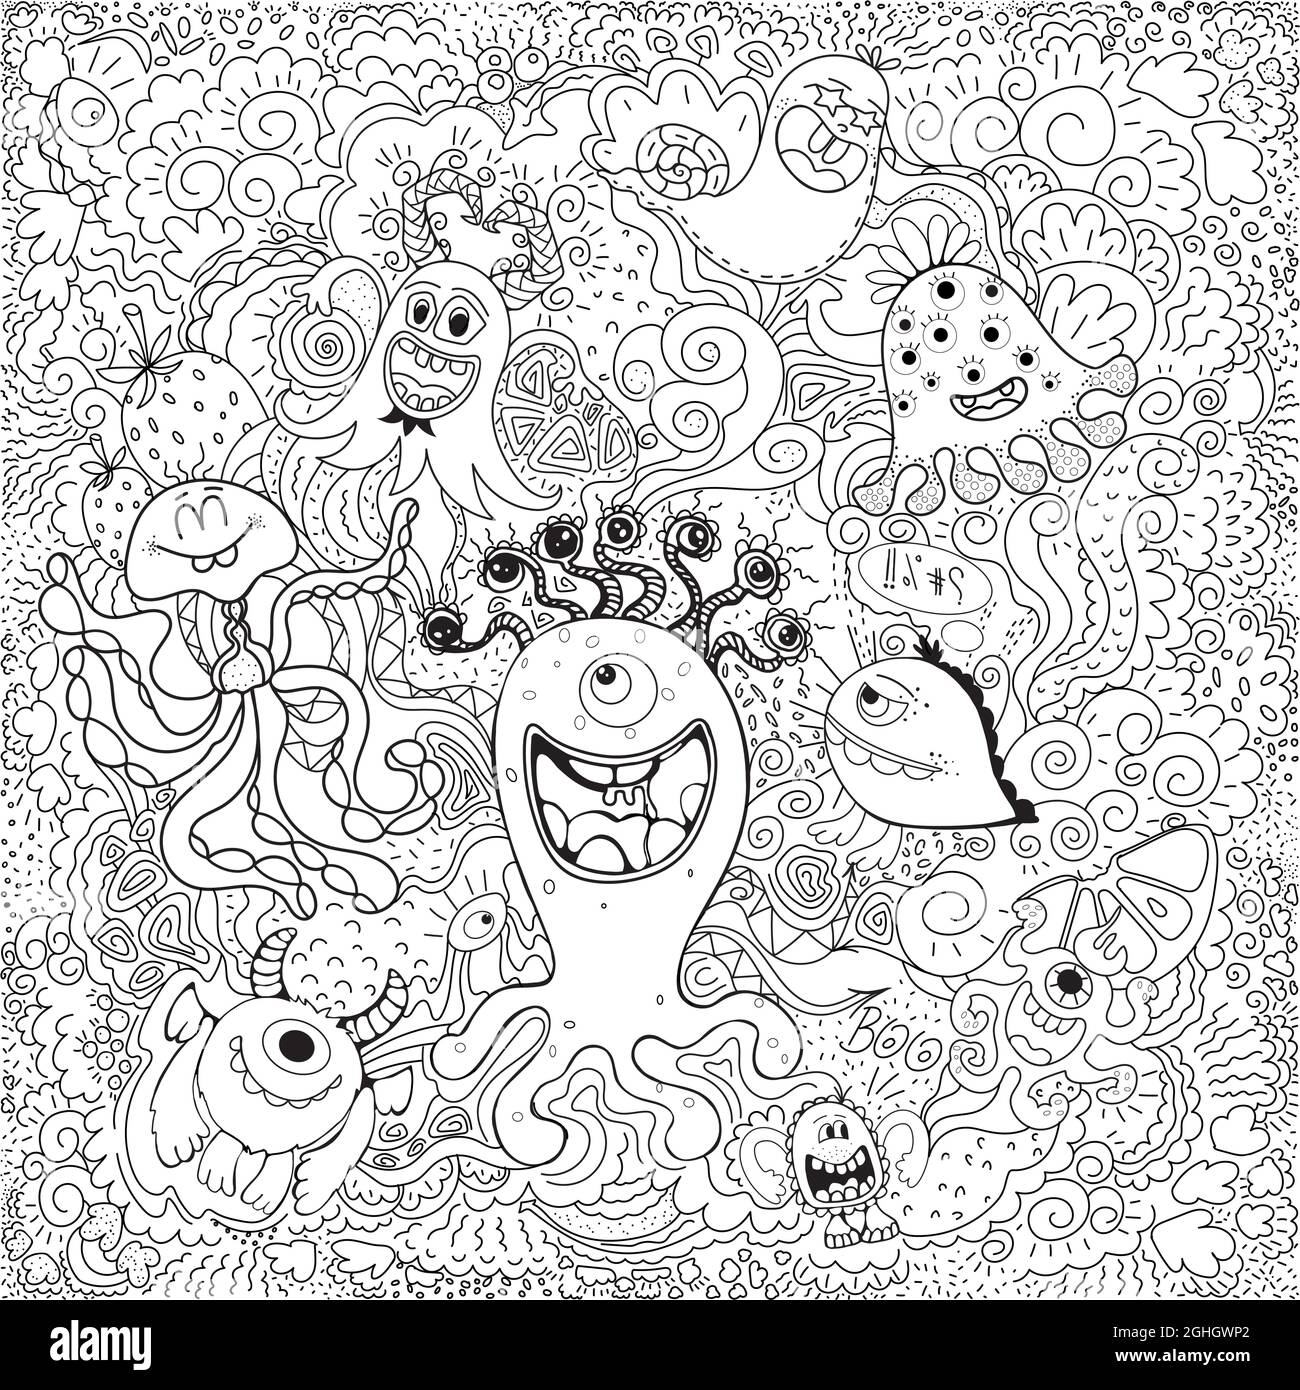 Composition of hand drawn sketch style fictional little monsters isolated on white background. Vector illustration. Stock Vector